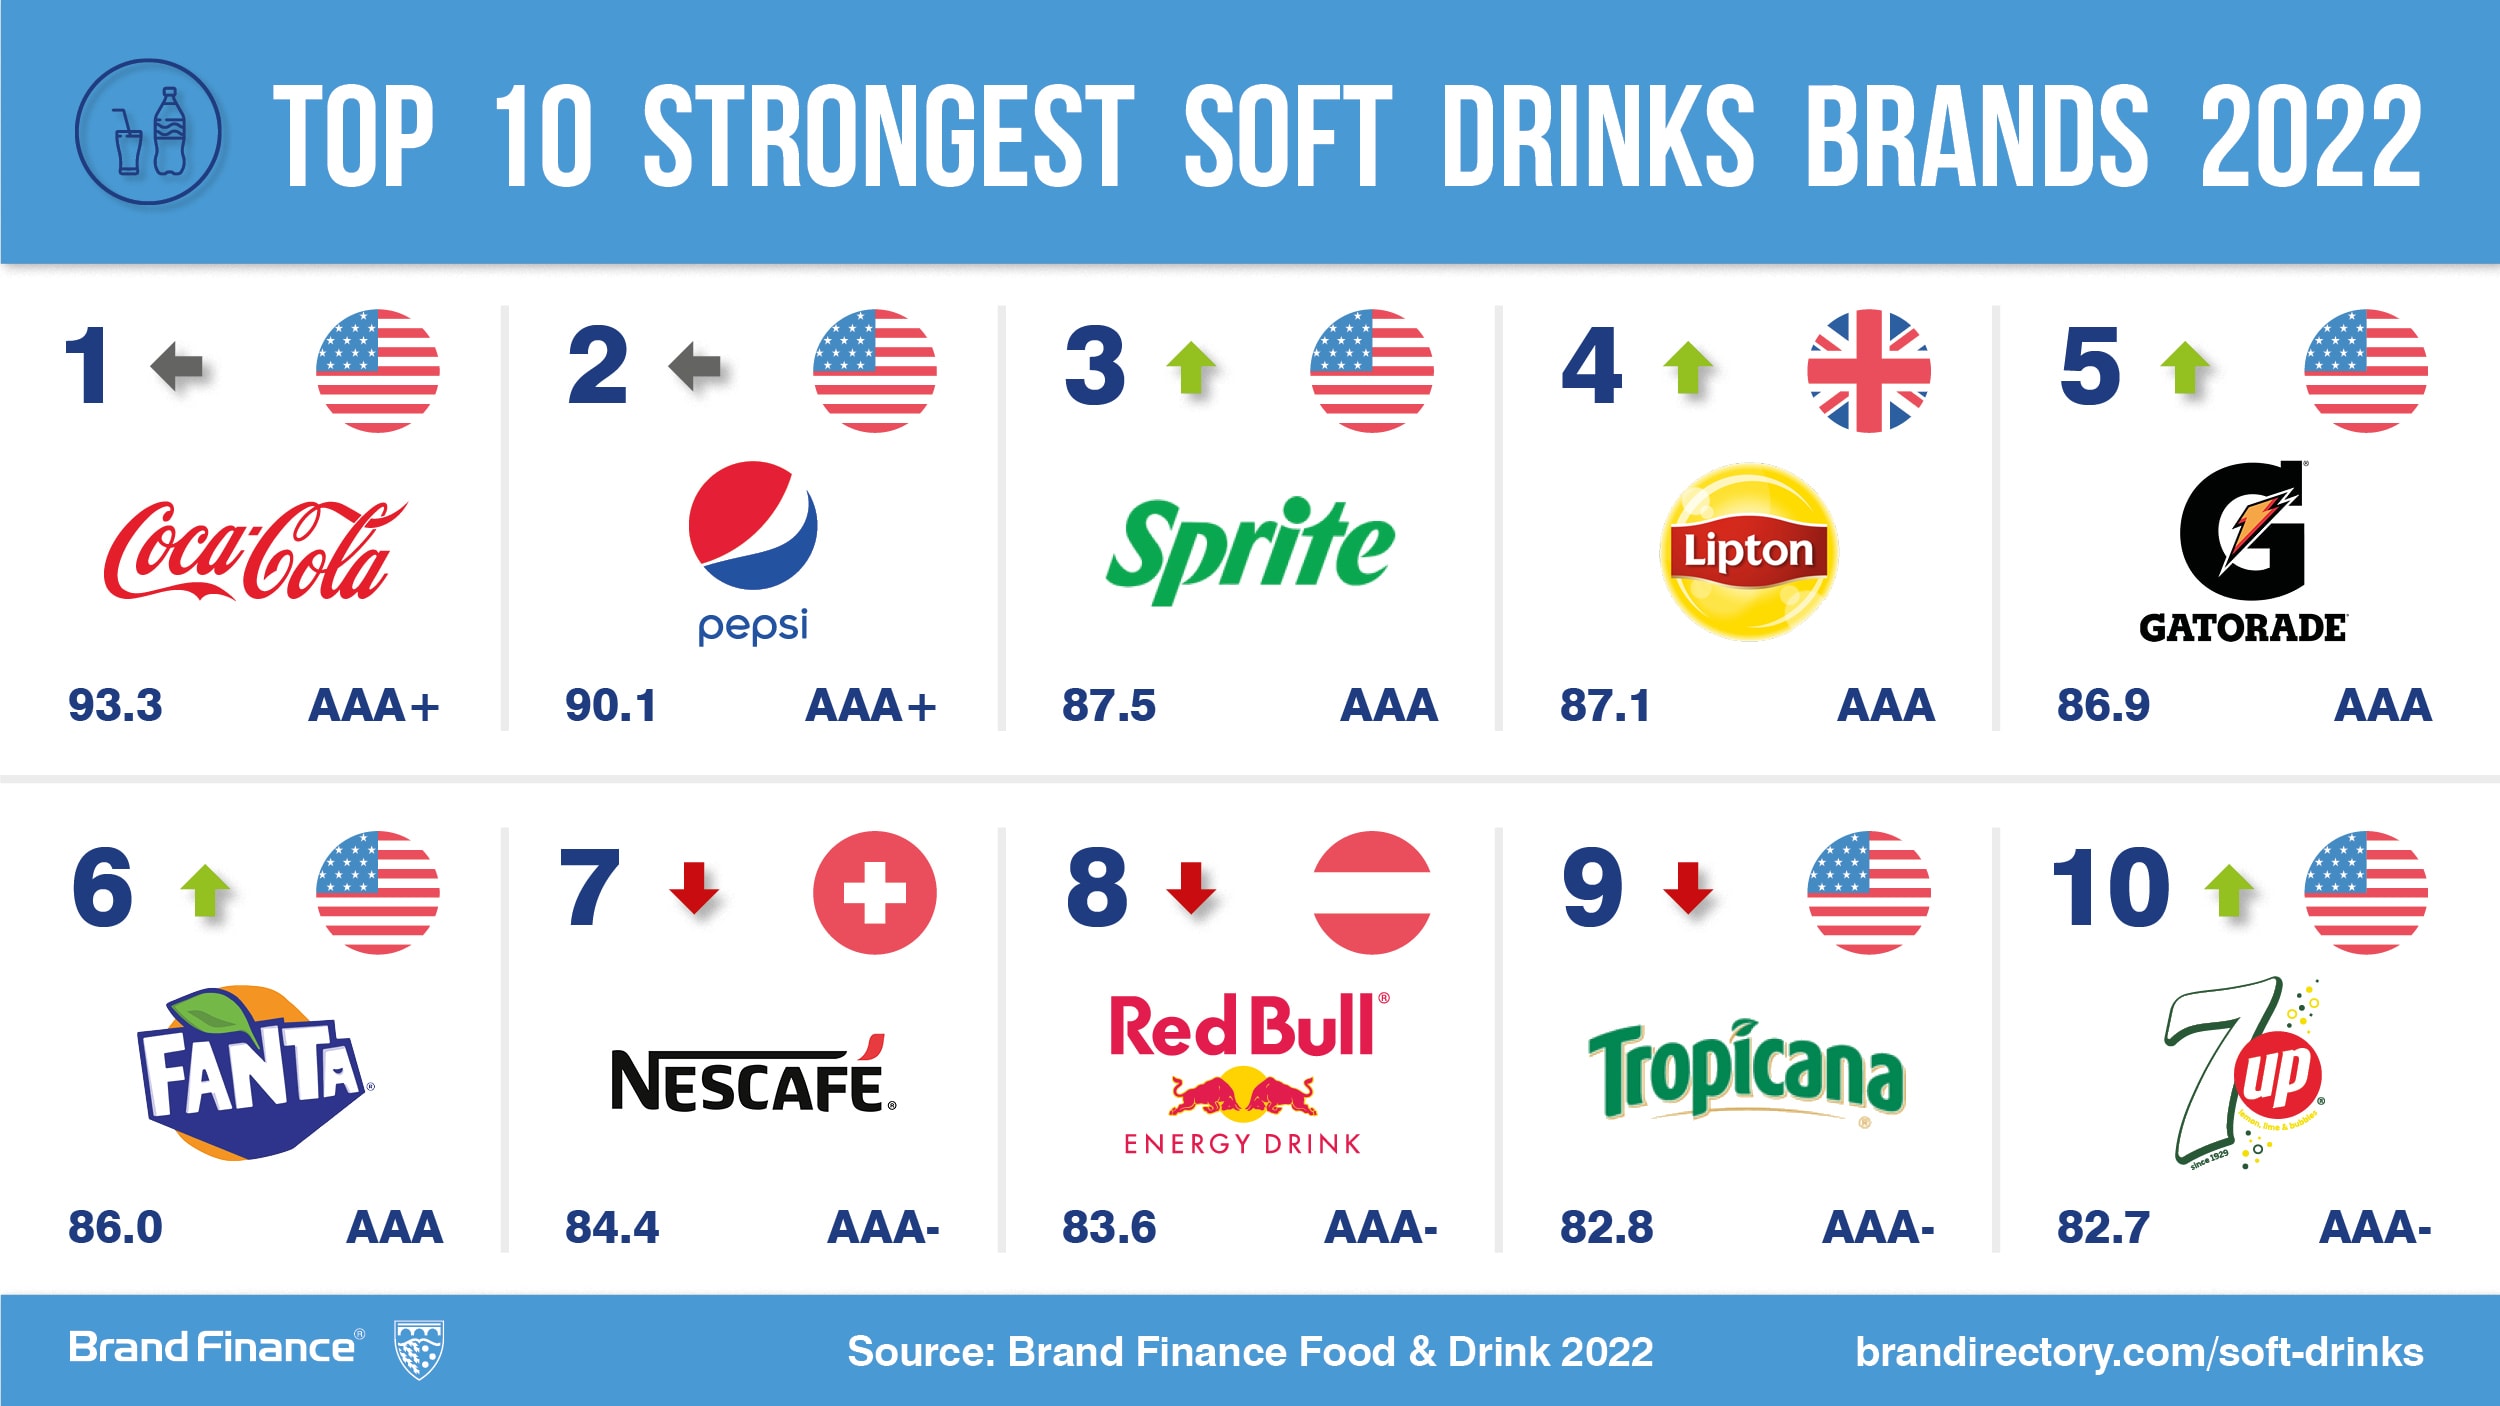 Nonalcoholic drinks brands are sparkling as the world looks to post